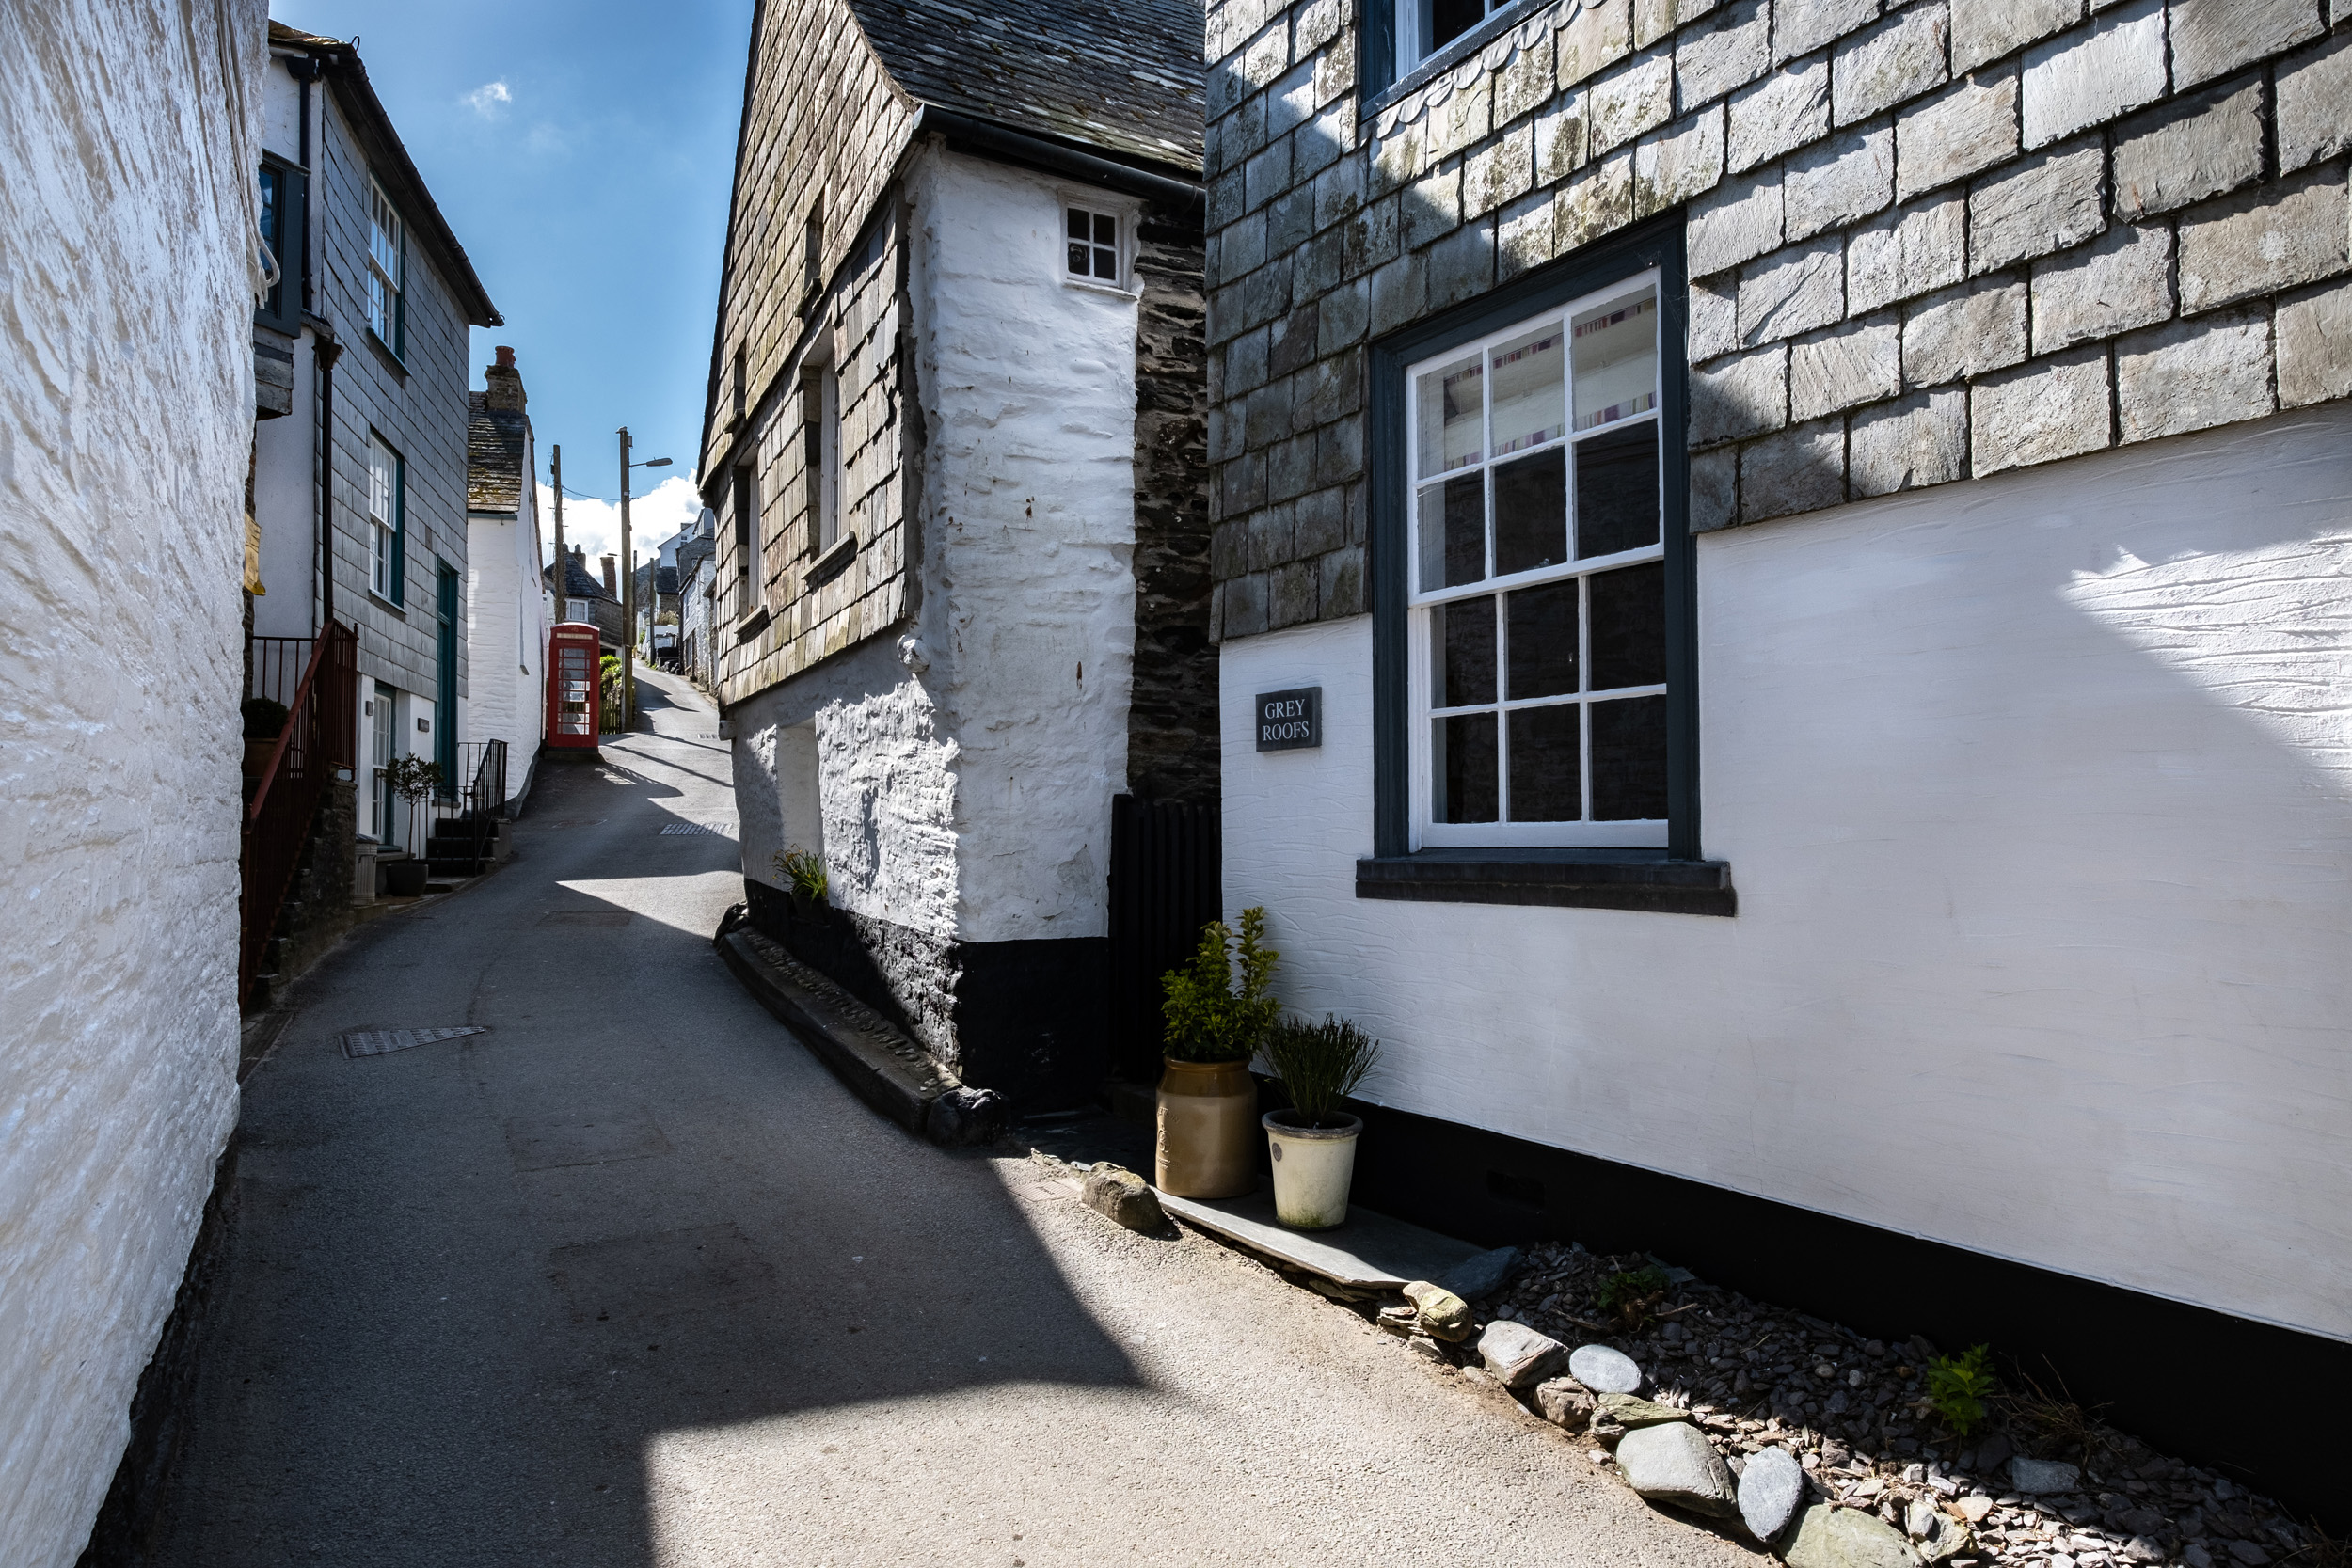 130 M² Cottage ∙ 3 Bedrooms ∙ 5 Guests - Port Isaac